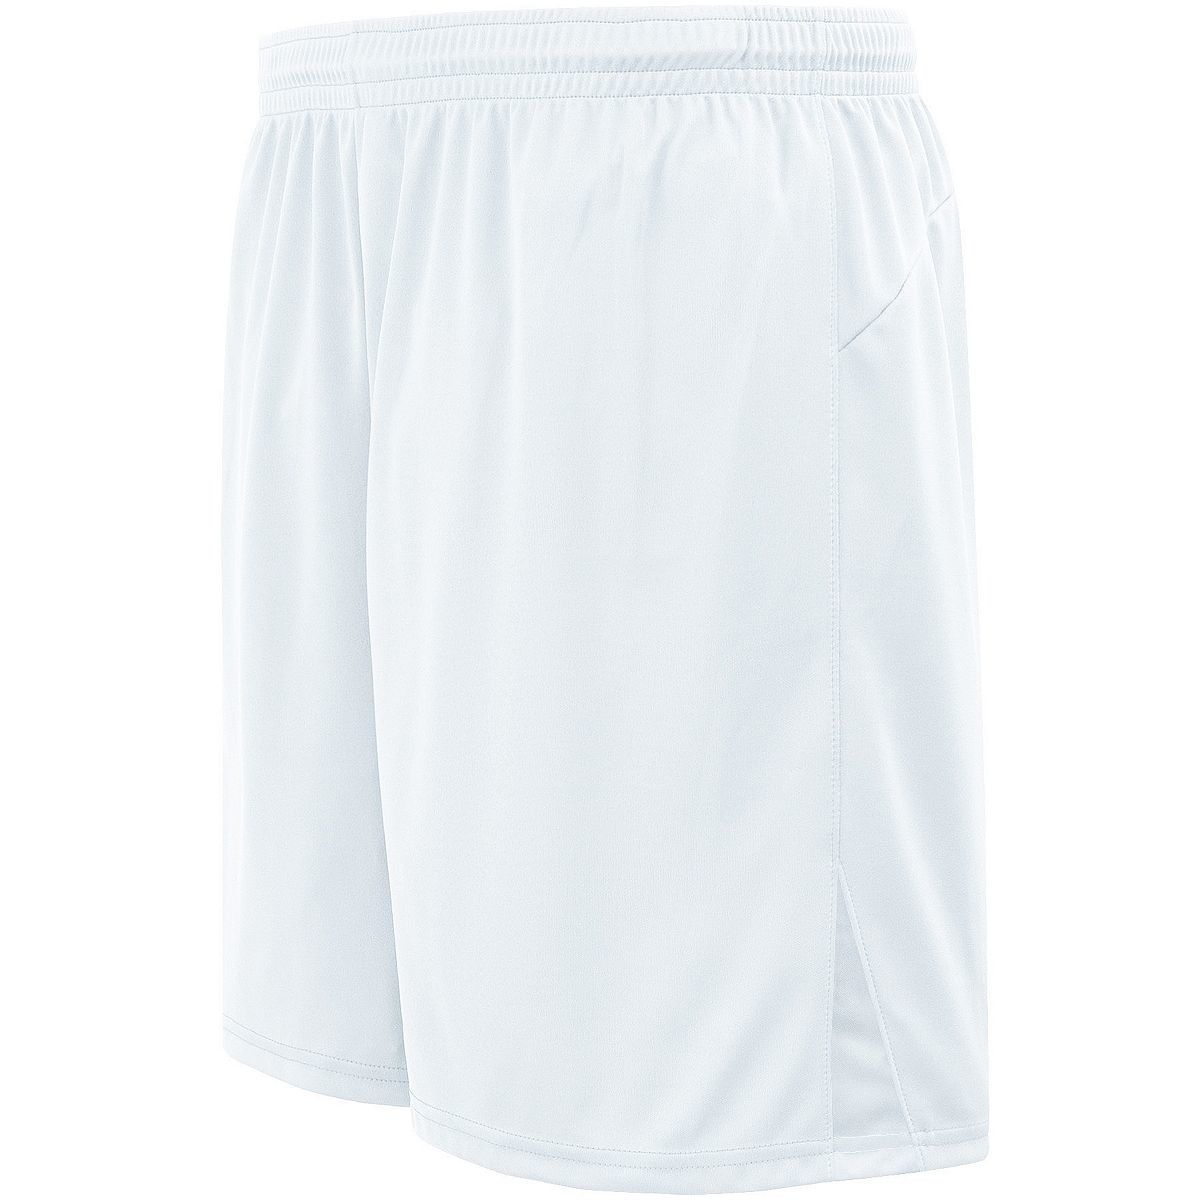 High 5 Youth Hawk Shorts in White/White  -Part of the Youth, Youth-Shorts, High5-Products, Soccer, All-Sports-1 product lines at KanaleyCreations.com